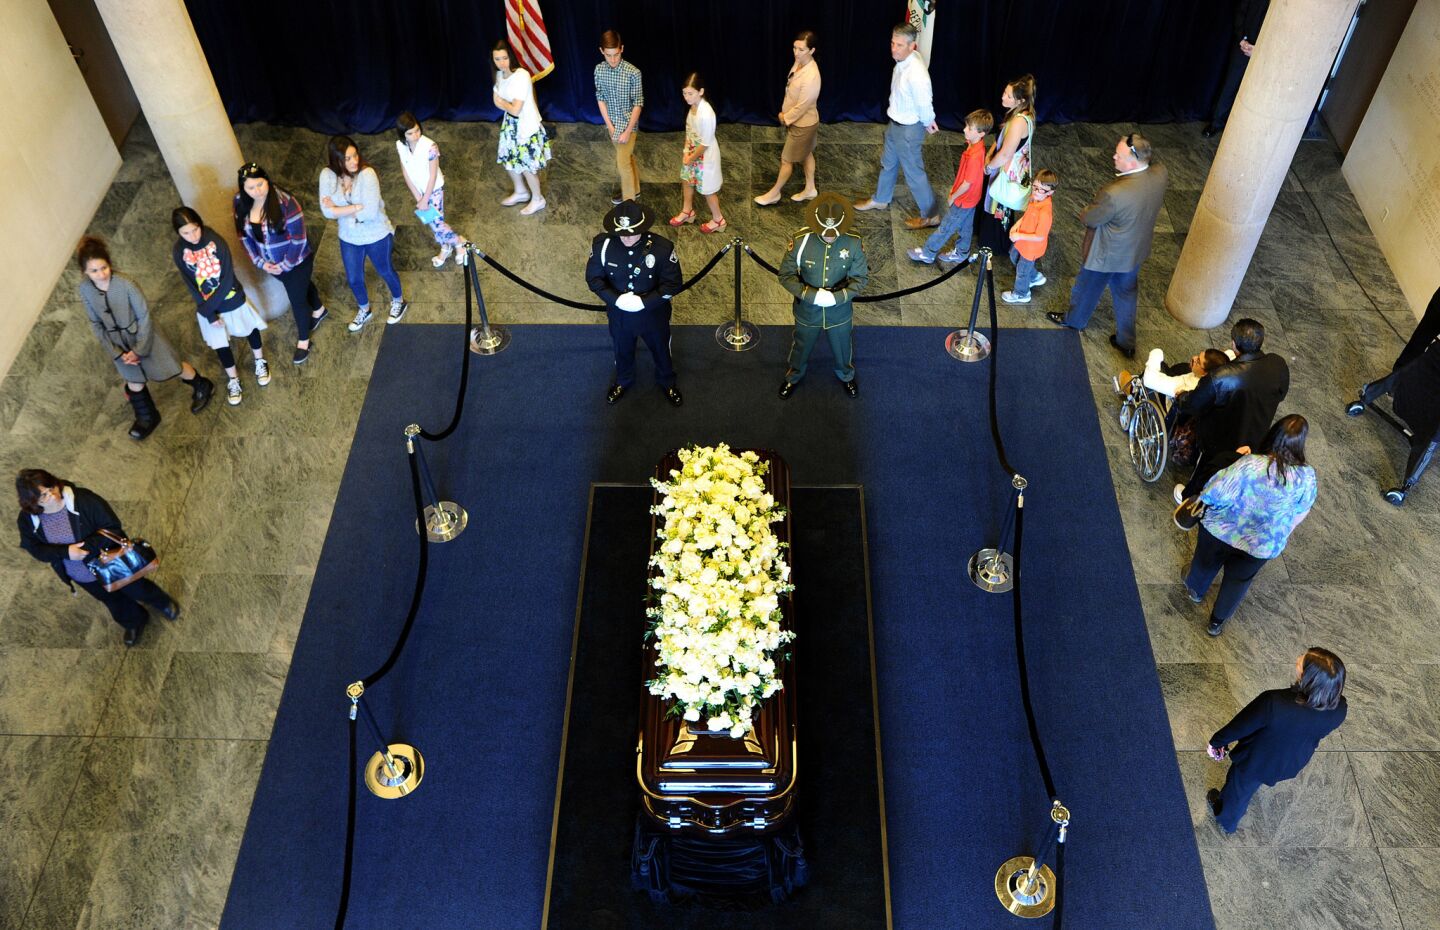 A line circles around the casket of Nancy Reagan at the Reagan Presidential Library in Simi Valley.